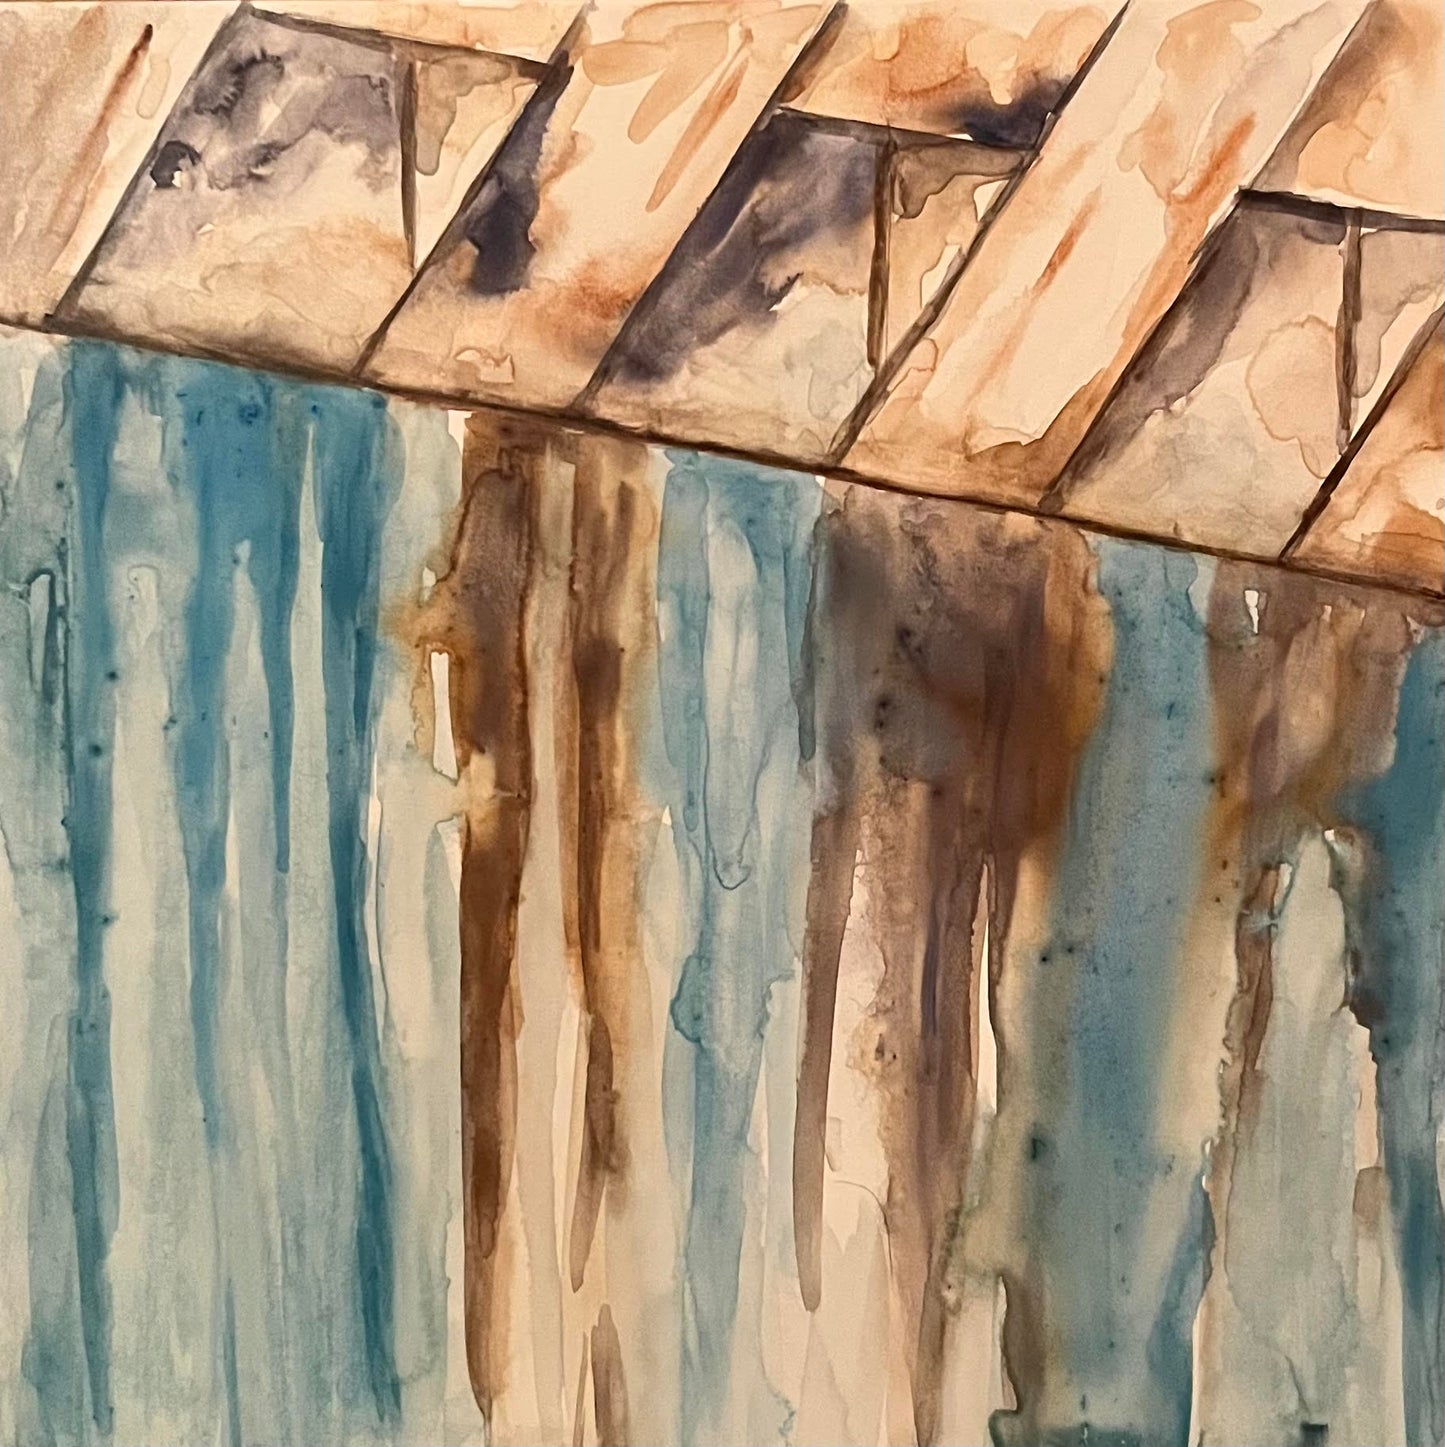 Monument Avenue Train Overpass -  6" x 6" x 1.5" - Watercolor on Clayboard Cradled Panel